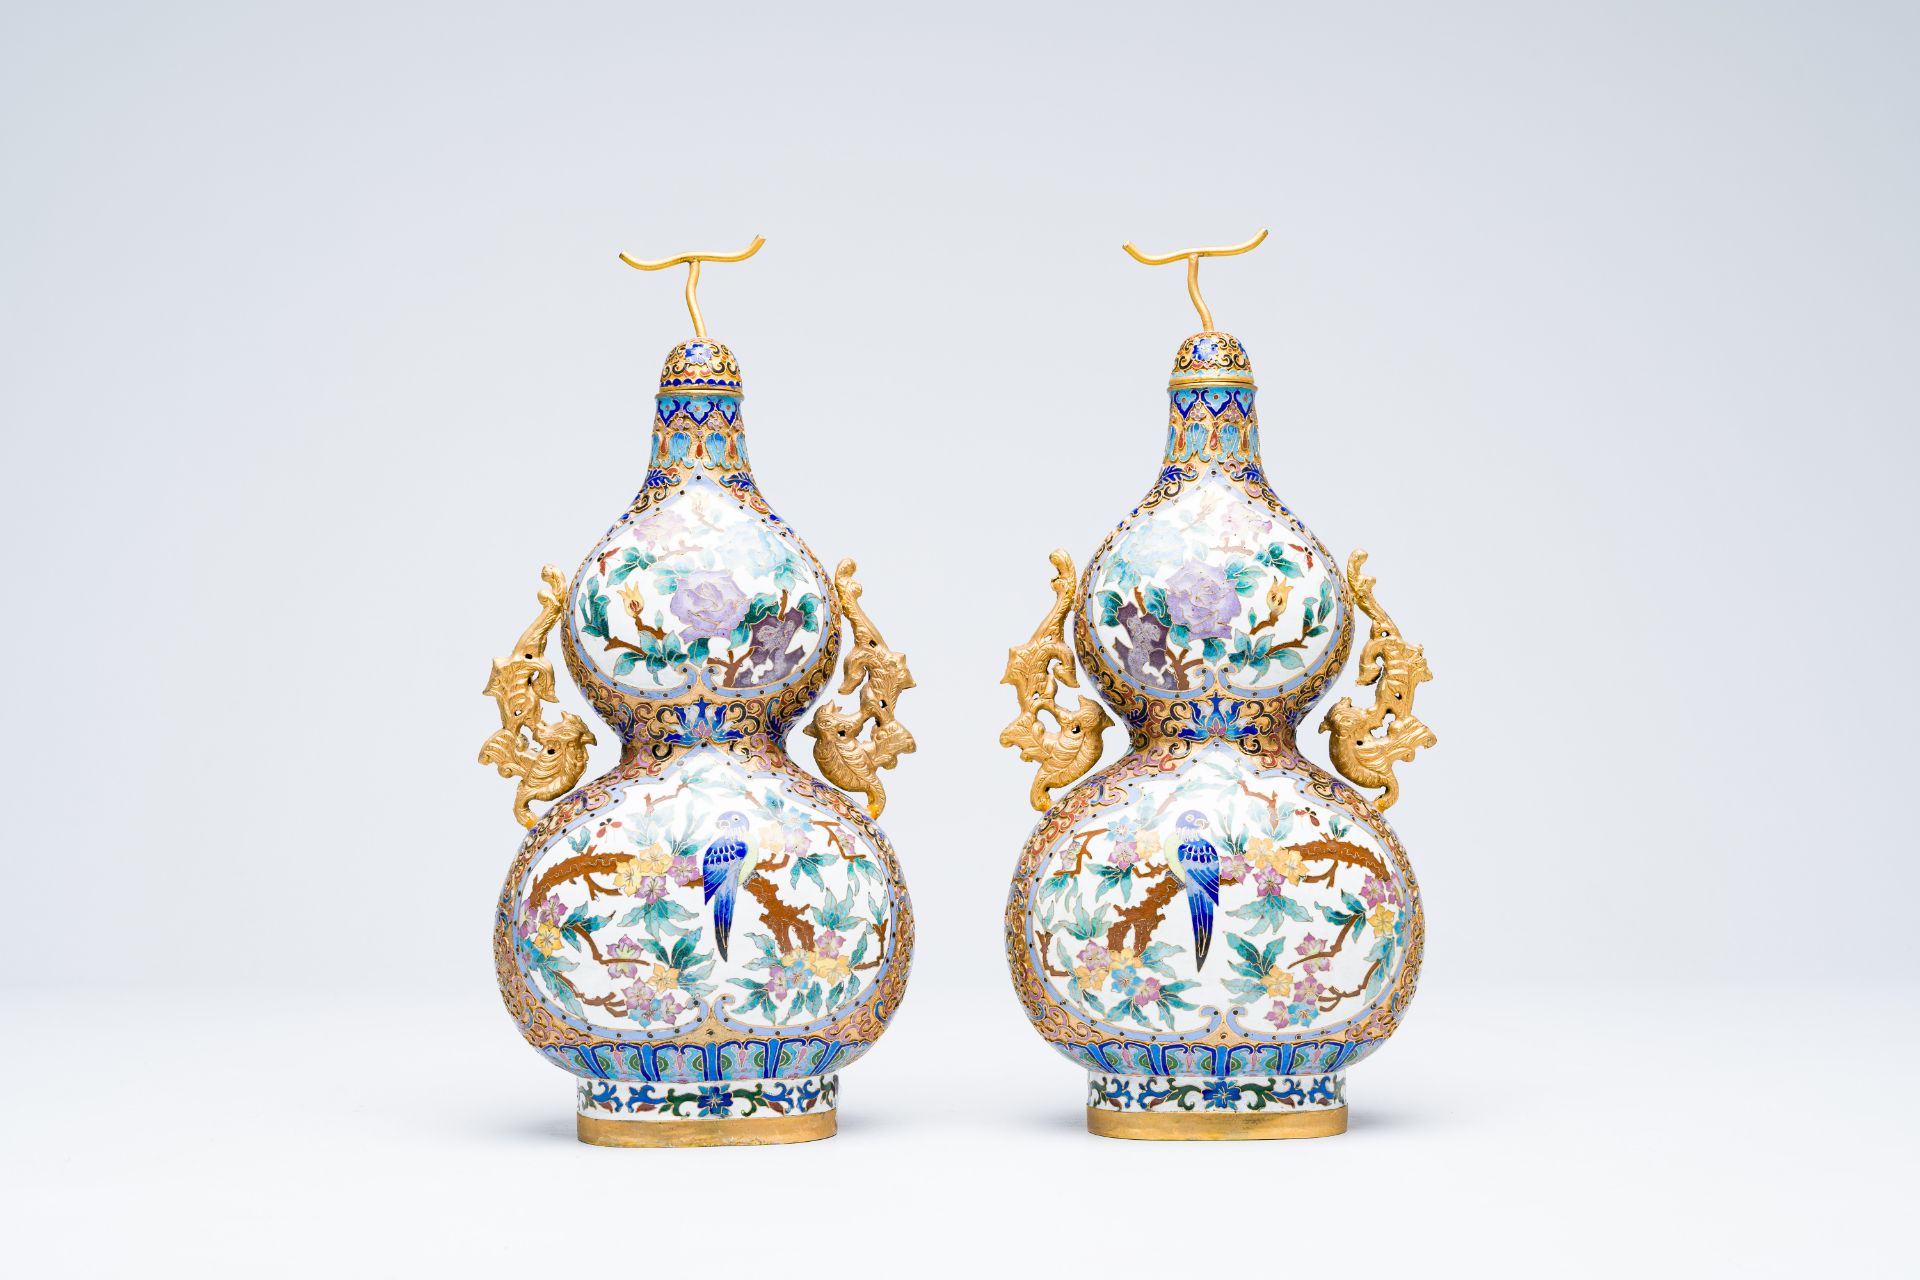 A pair of Chinese cloisonne double gourd vases on wooden stands, 20th C. - Image 2 of 9